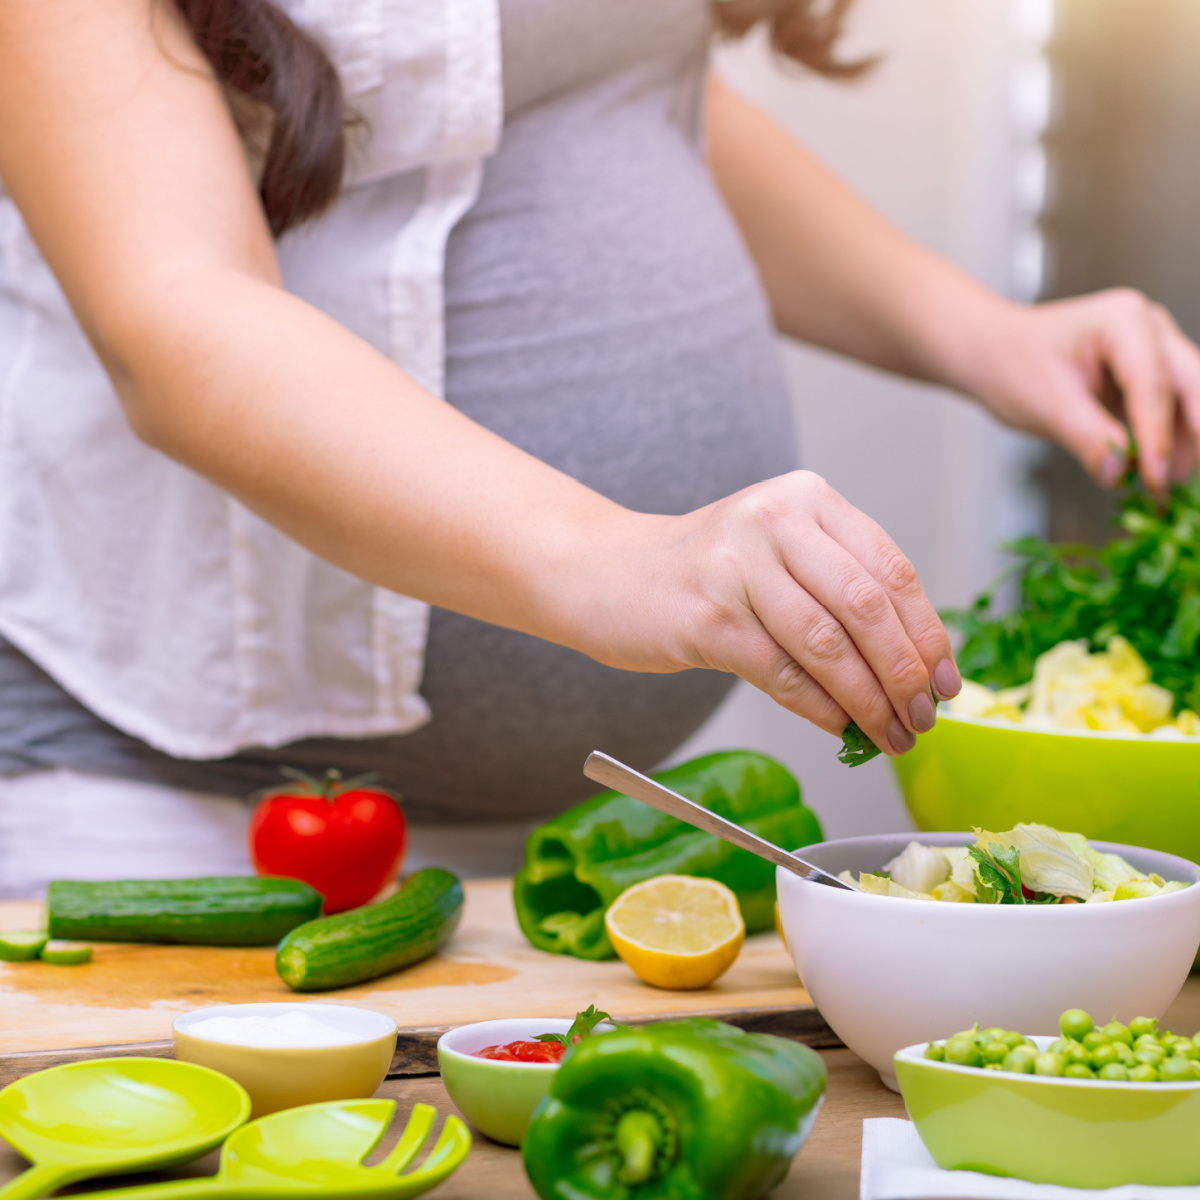 A pregnant woman eating healthy food